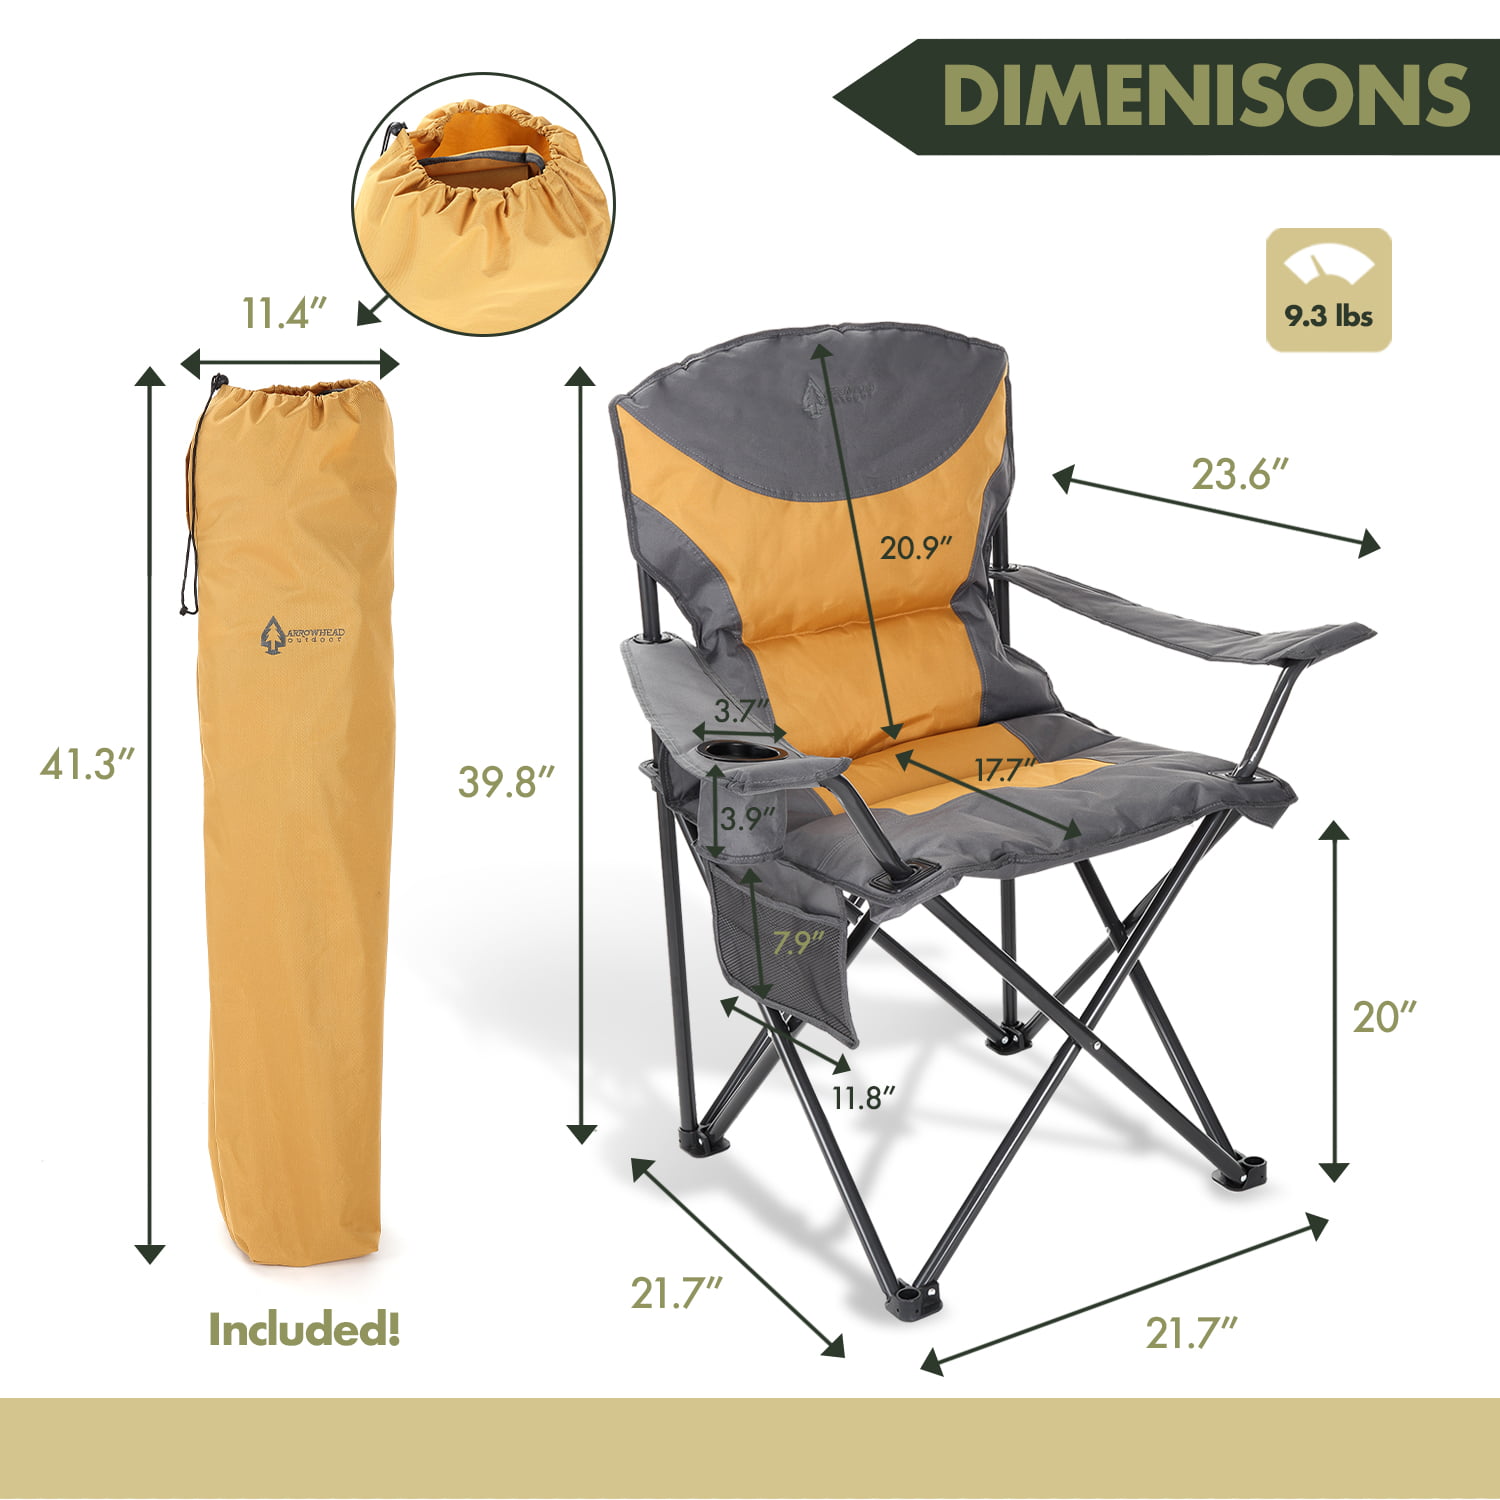 Arrowhead Outdoor Camping Chair, Tan and Gray